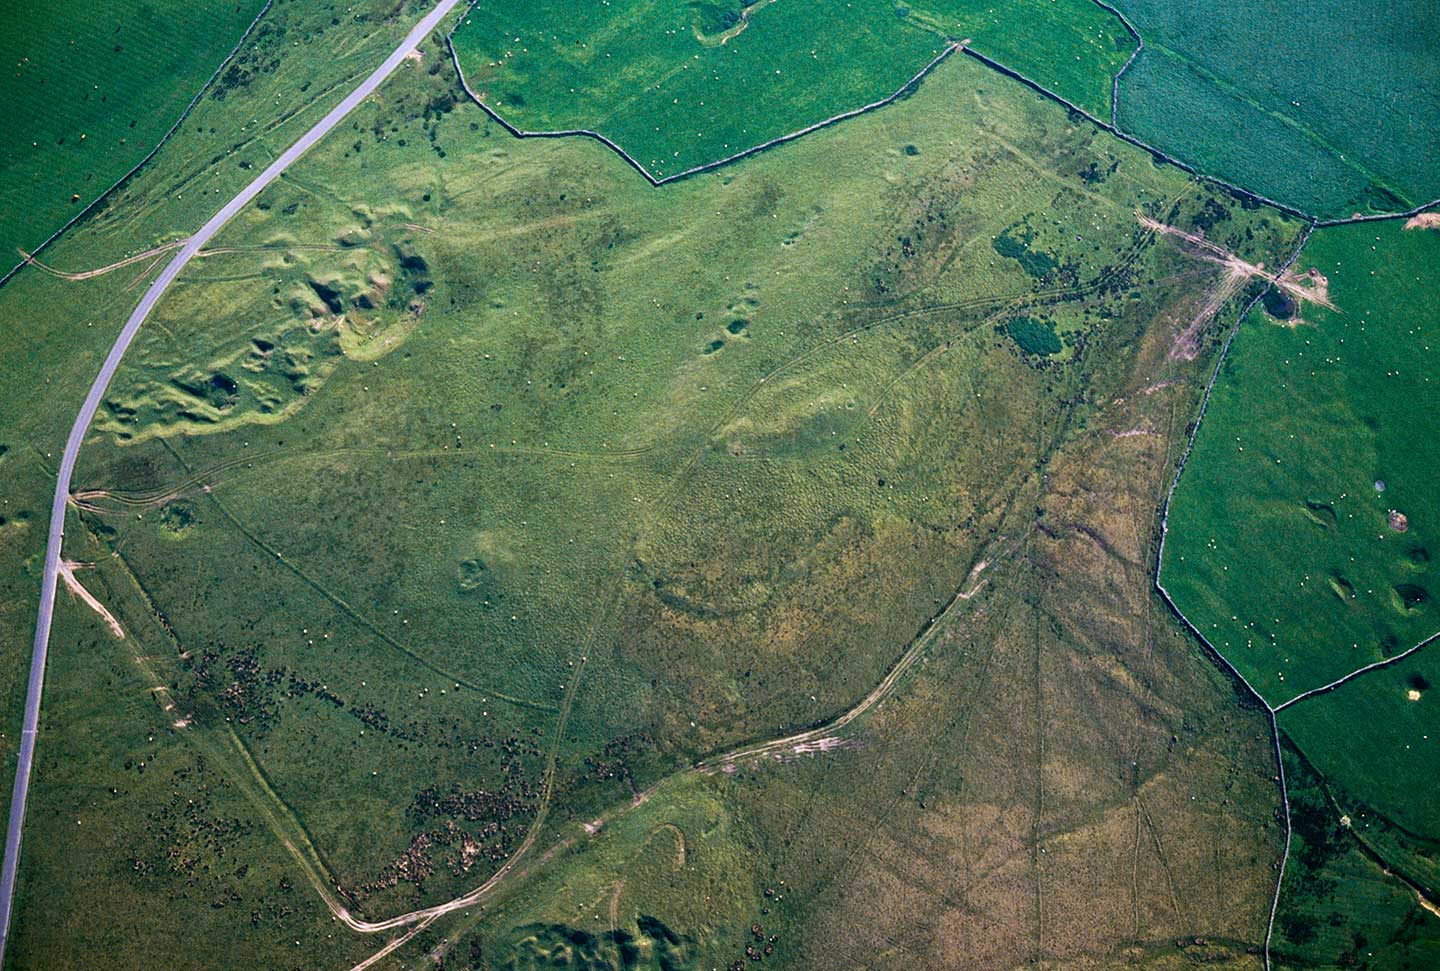 Colour aerial photo showing moorland crossed by tracks, with an oval enclosure on a hilltop and some quarrying to the left